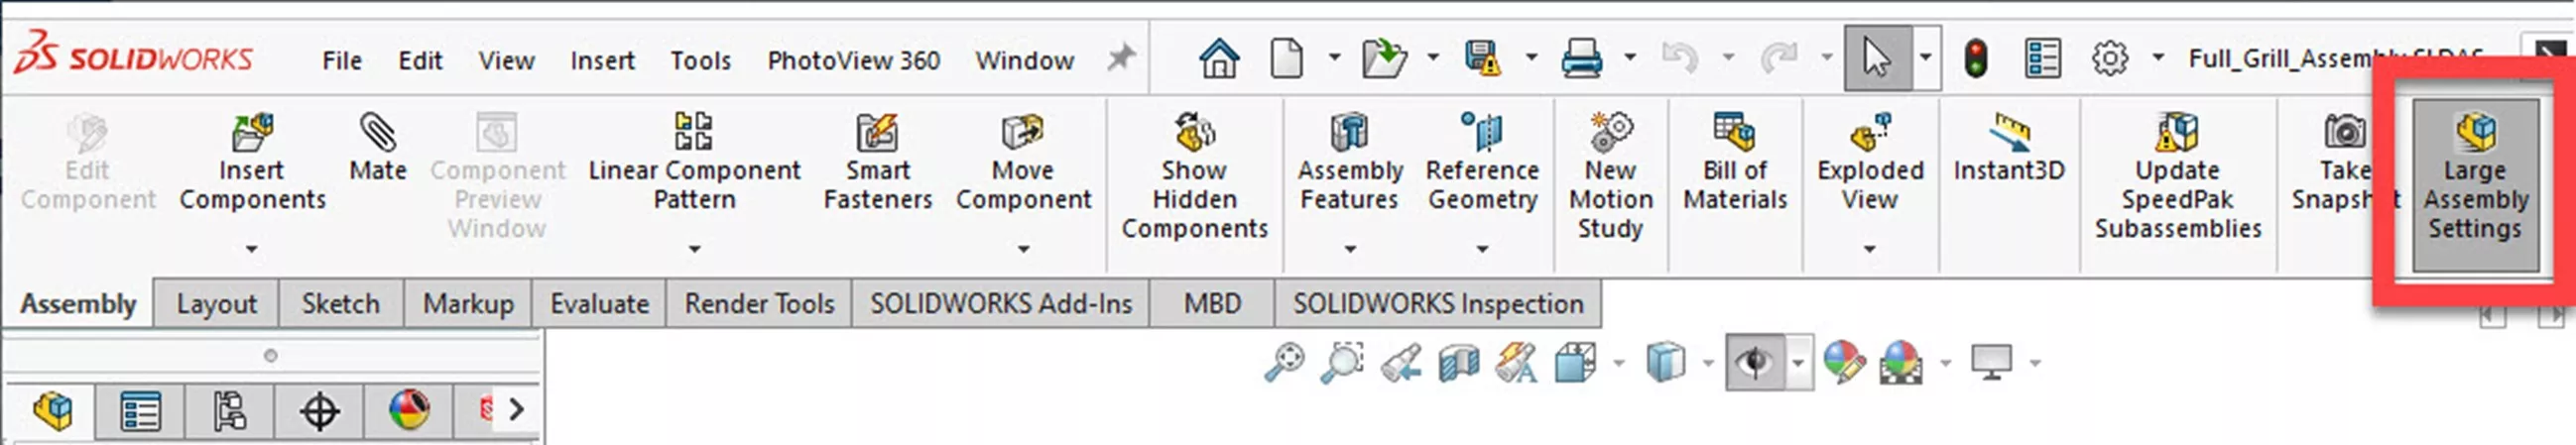 Large Assembly Settings in SOLIDWORKS 